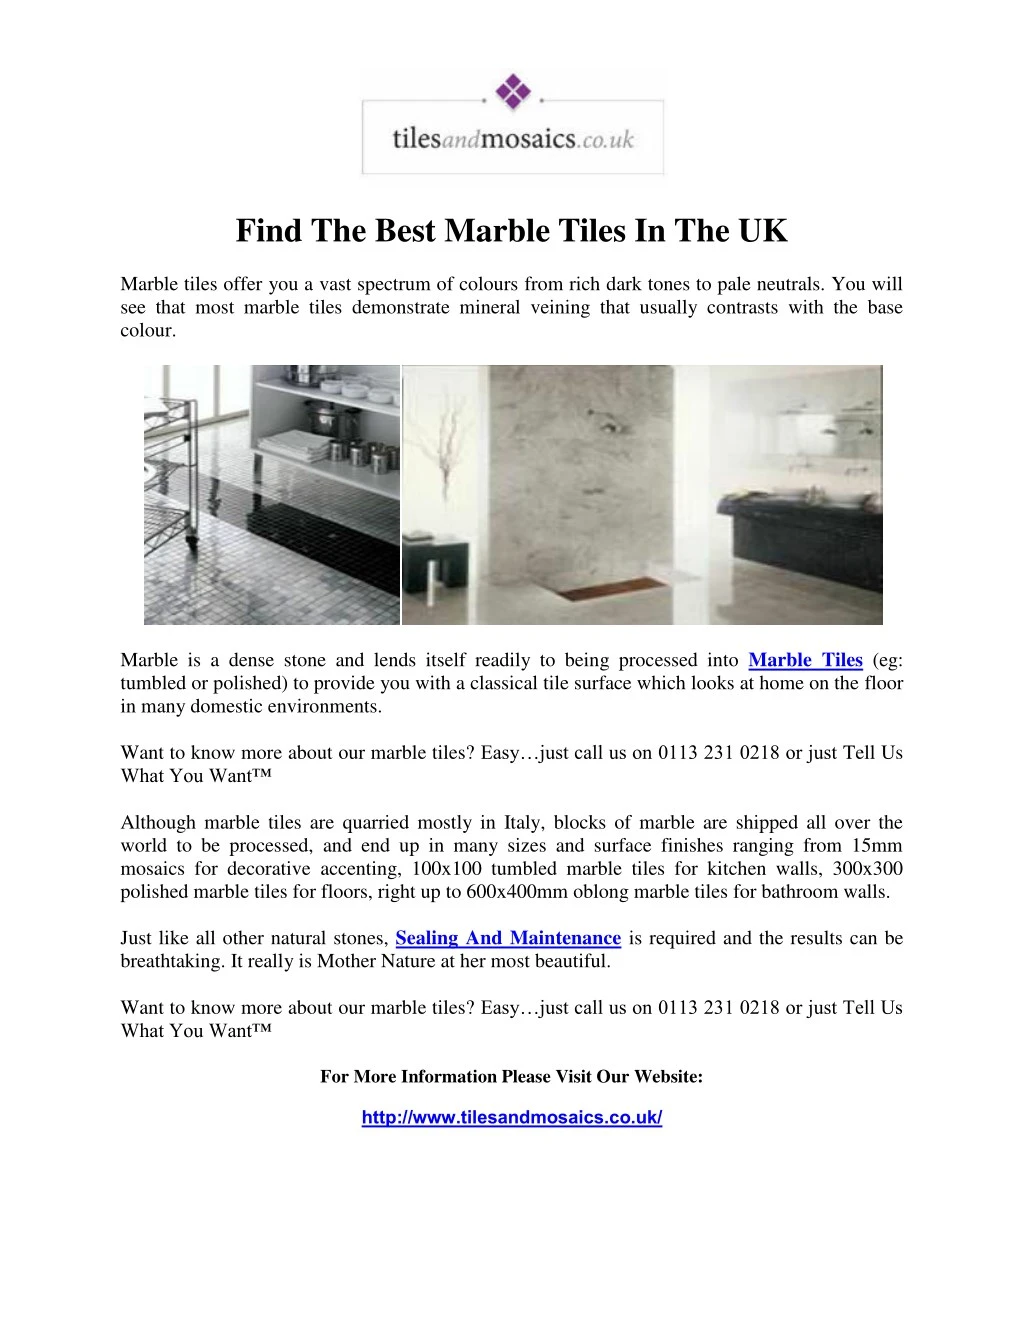 find the best marble tiles in the uk